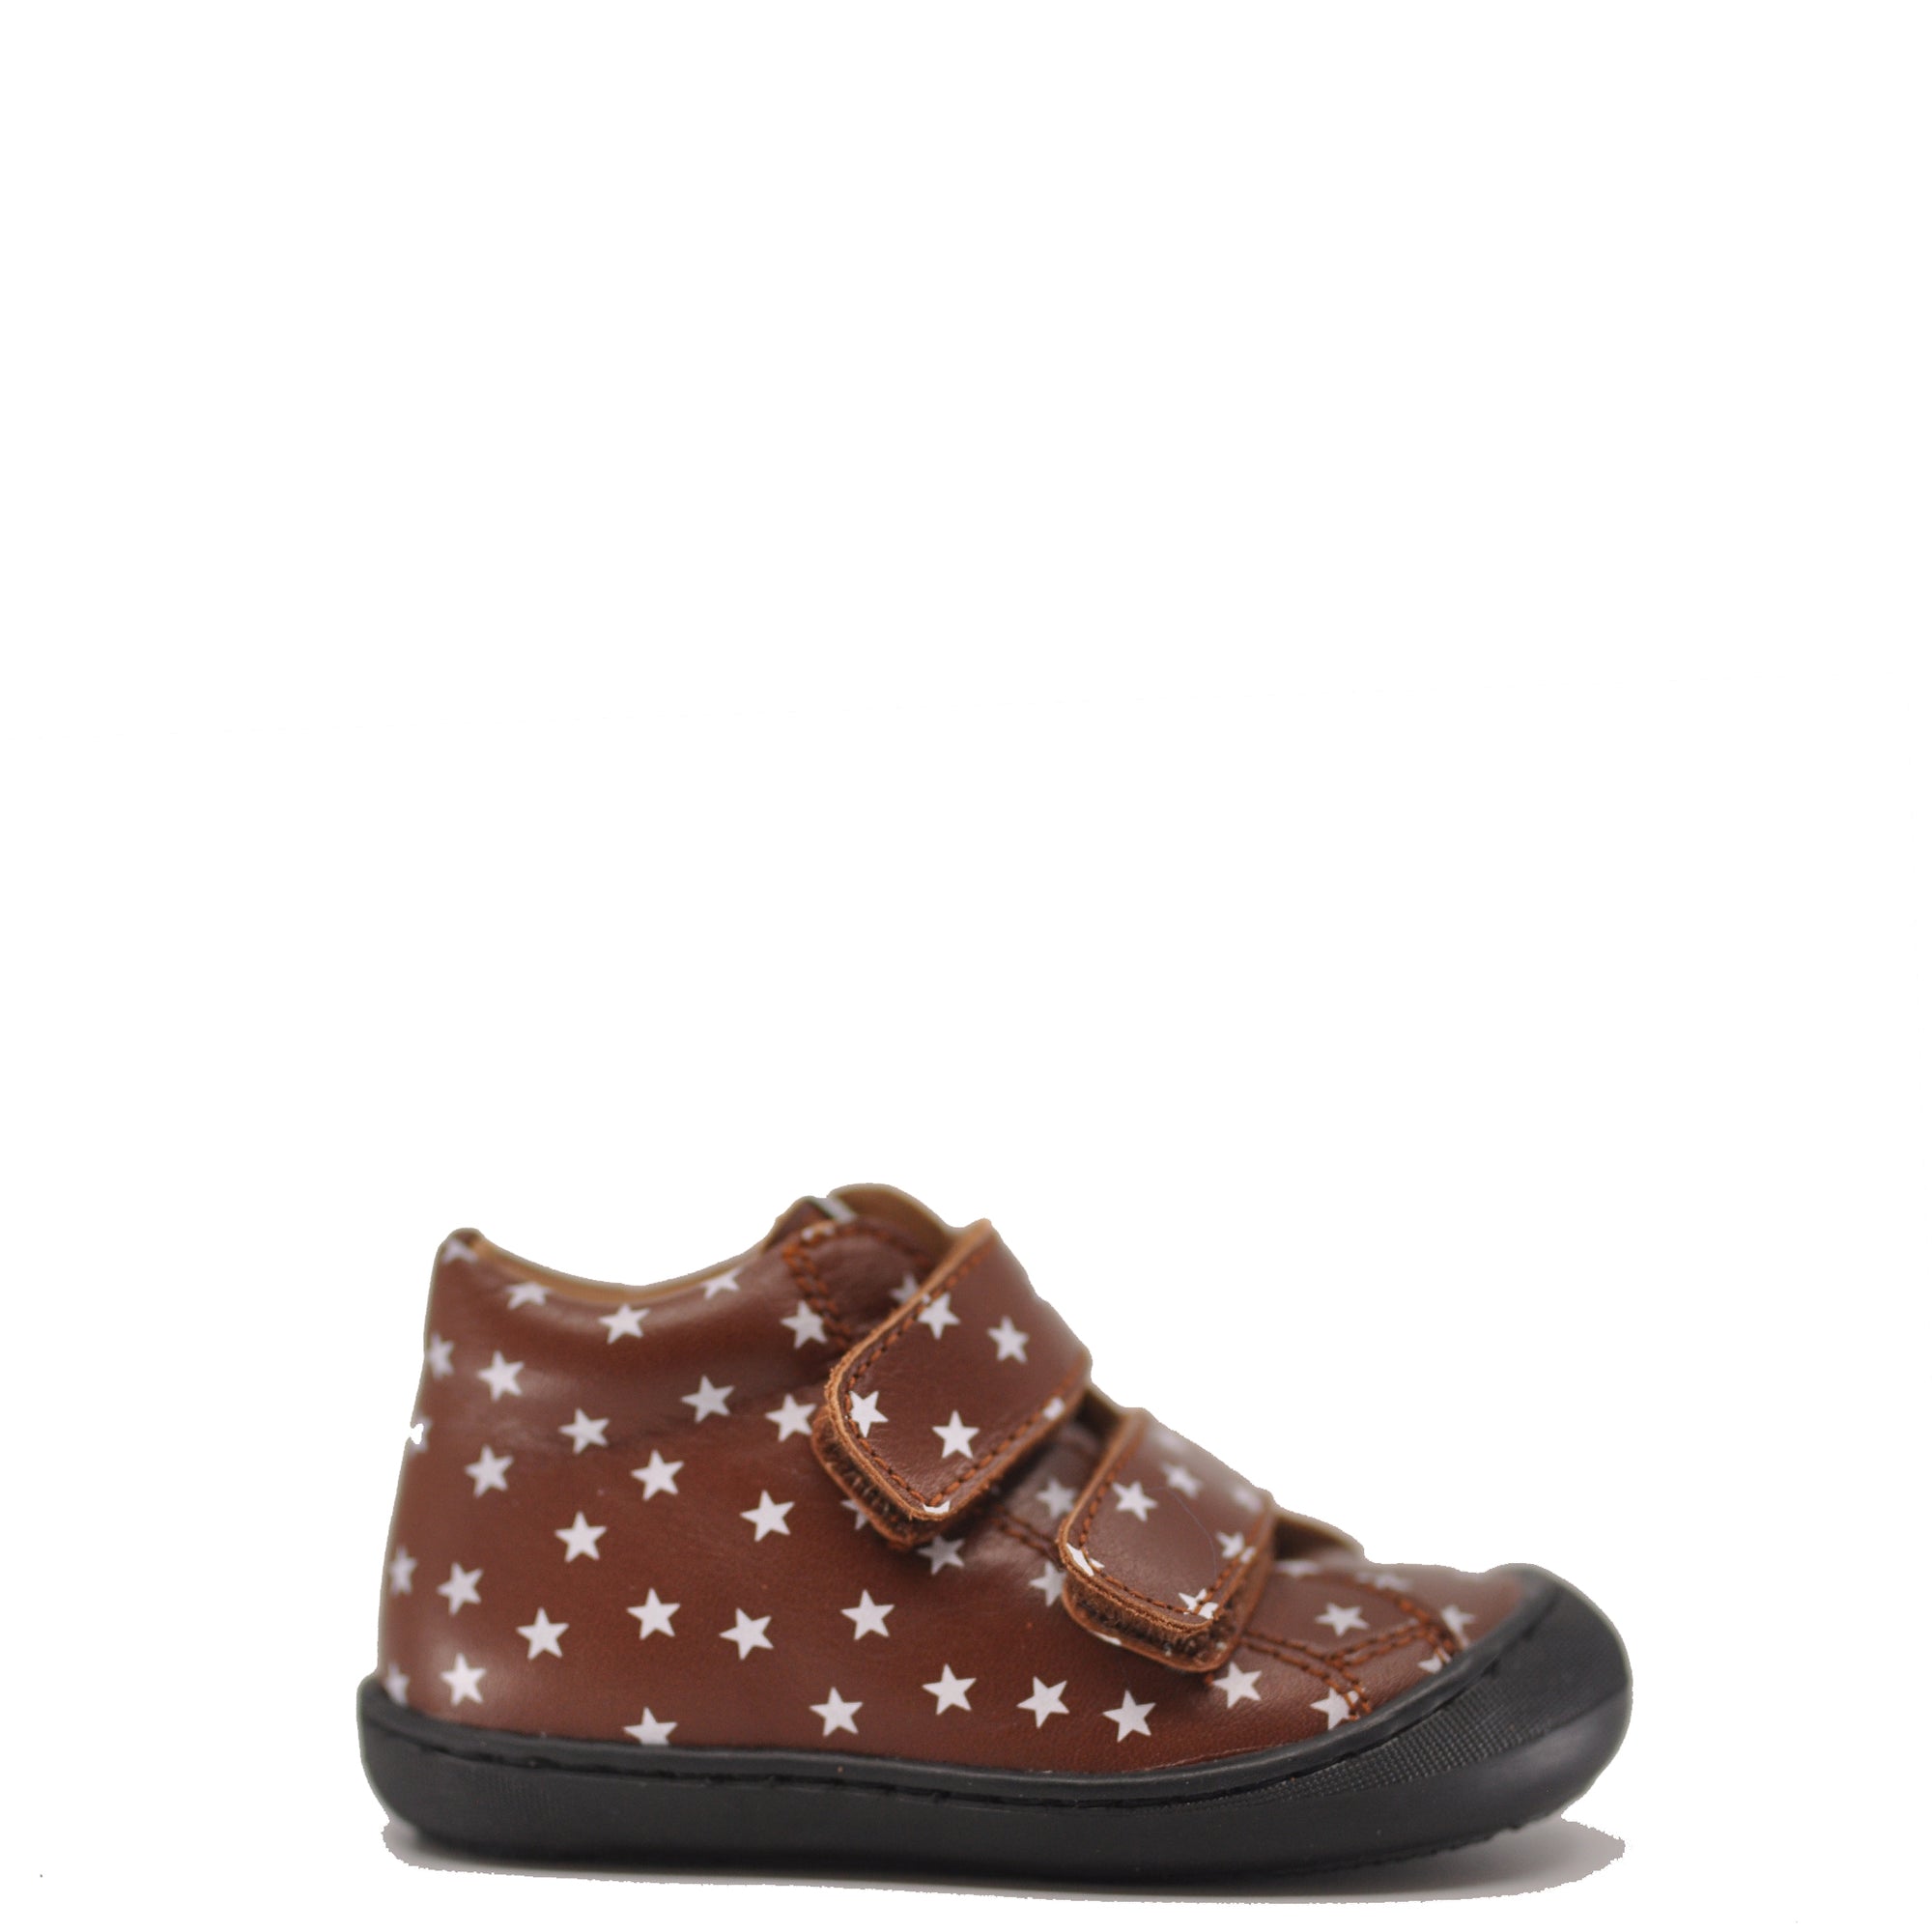 MAA Brown And White Star Baby Sneaker-Tassel Children Shoes